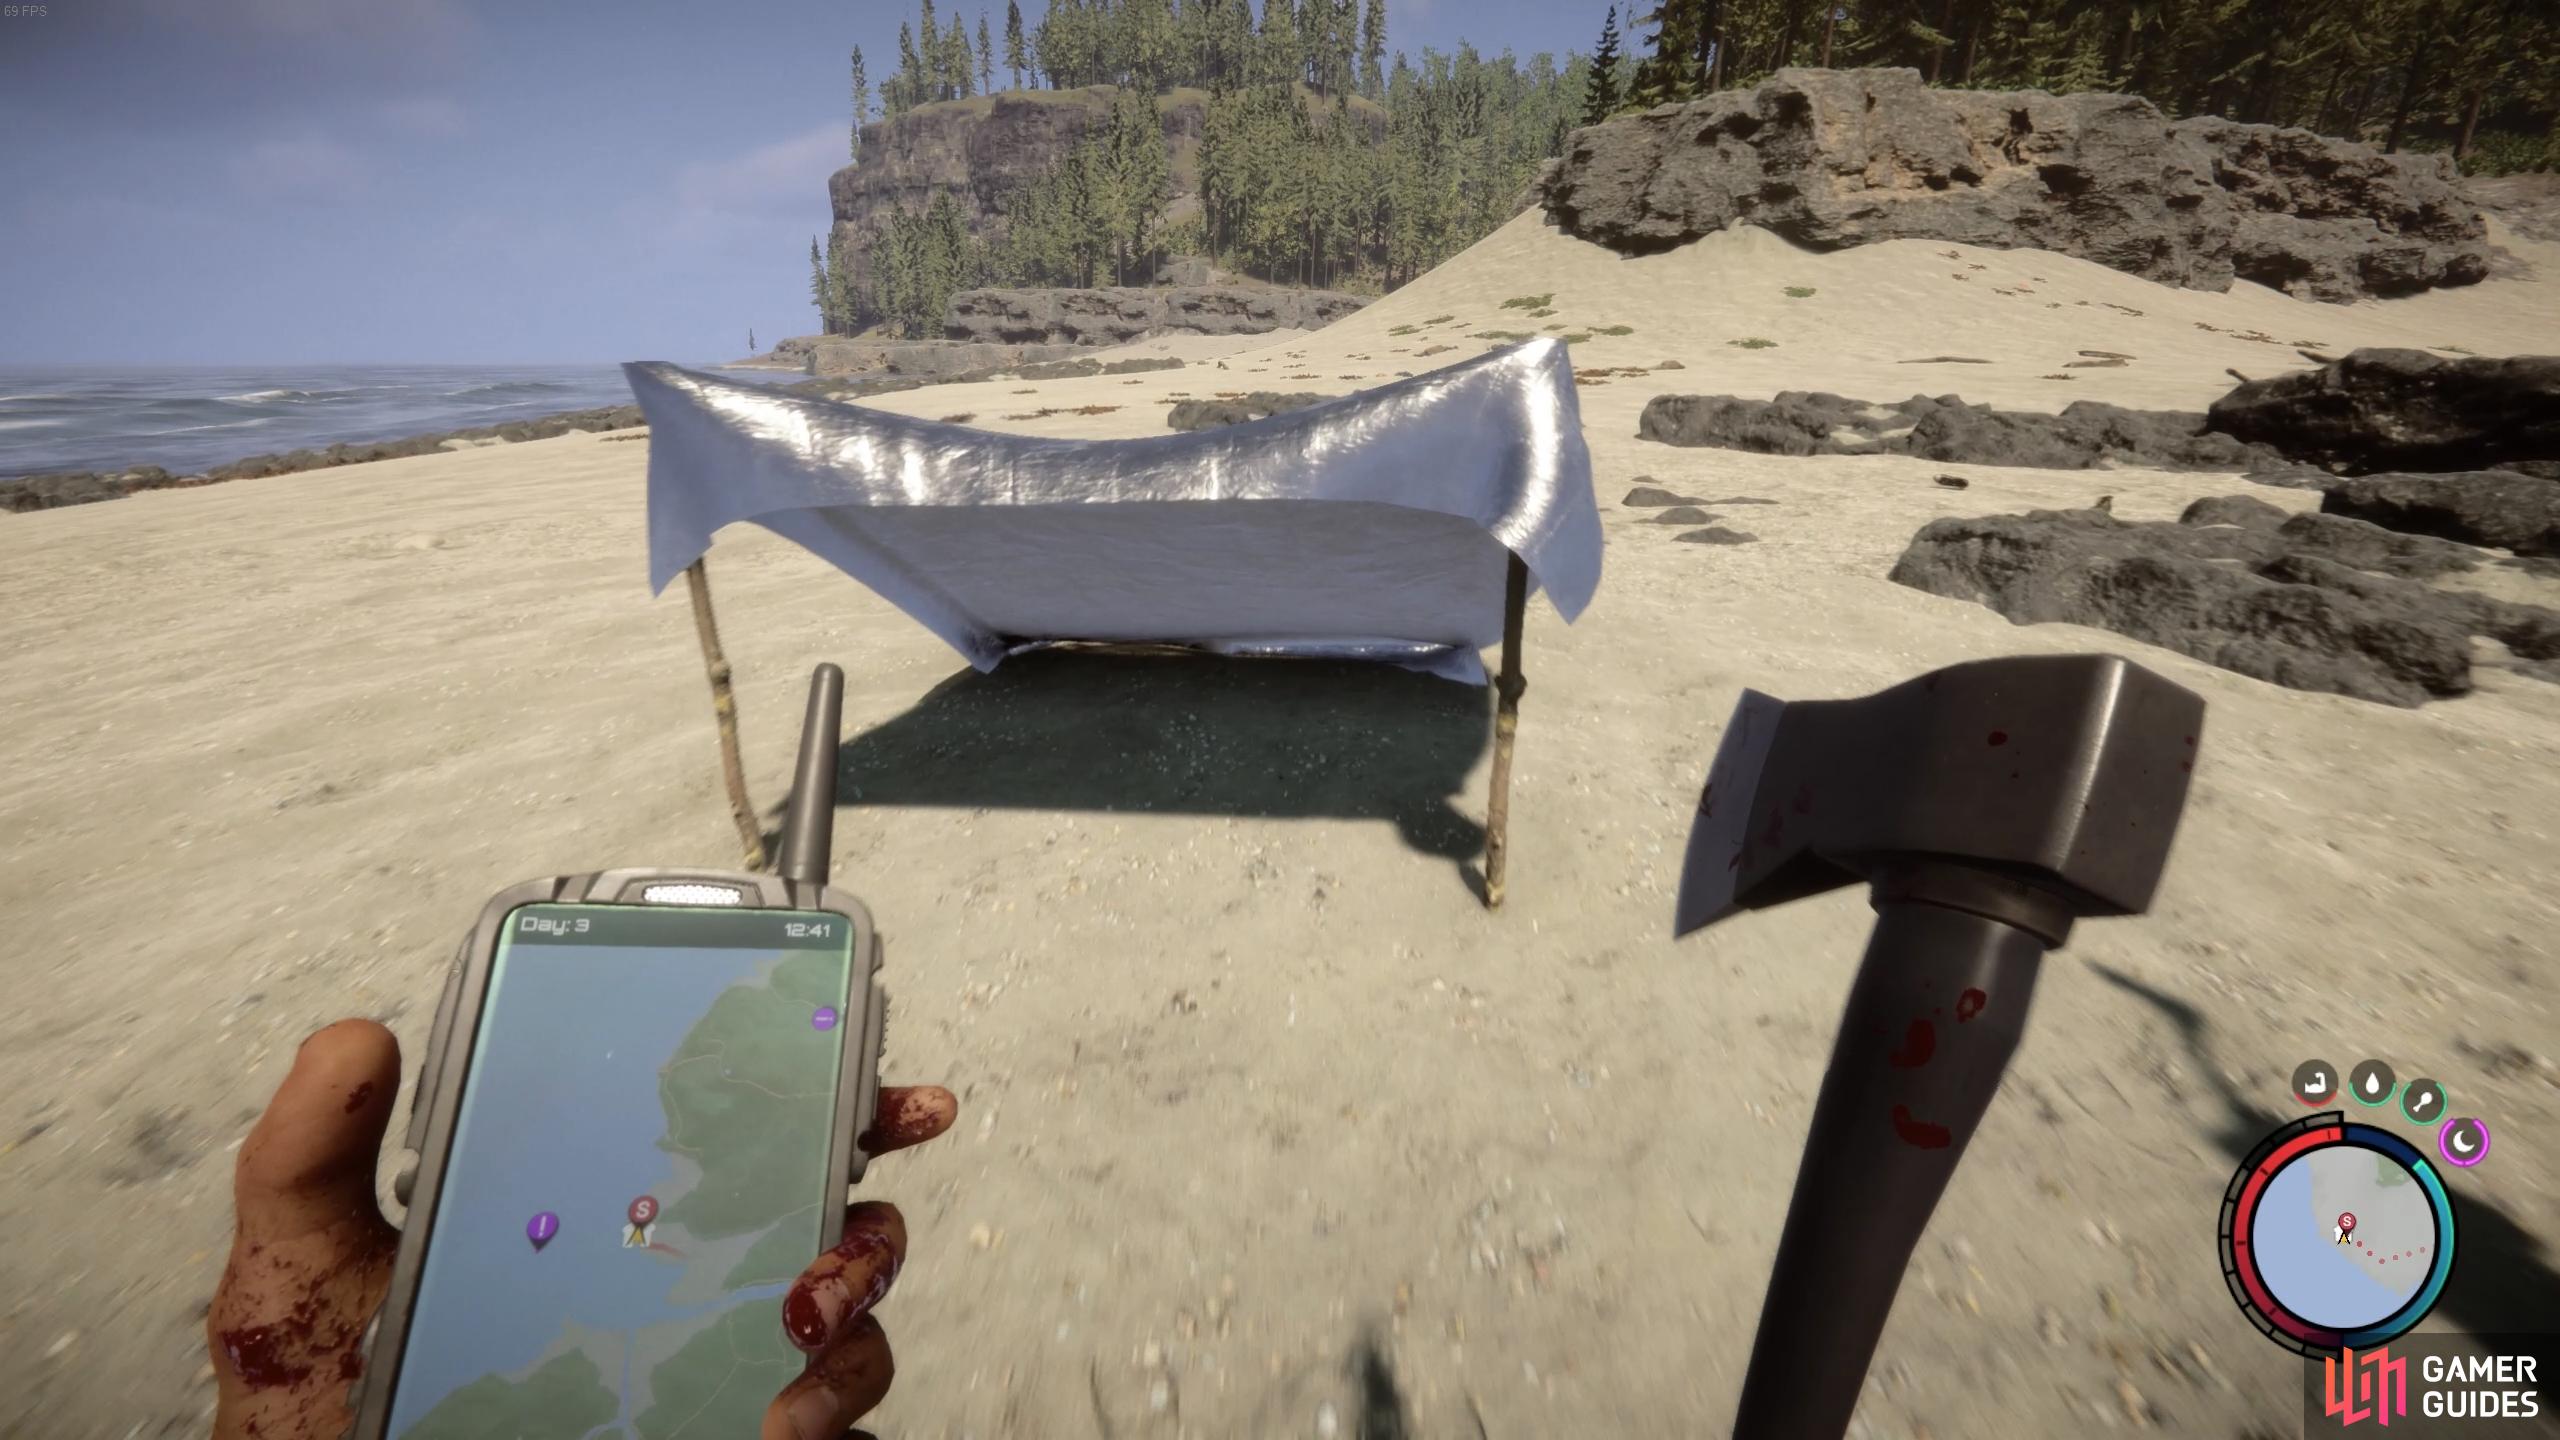 Build a shelter to save your game before you swim to the life raft.